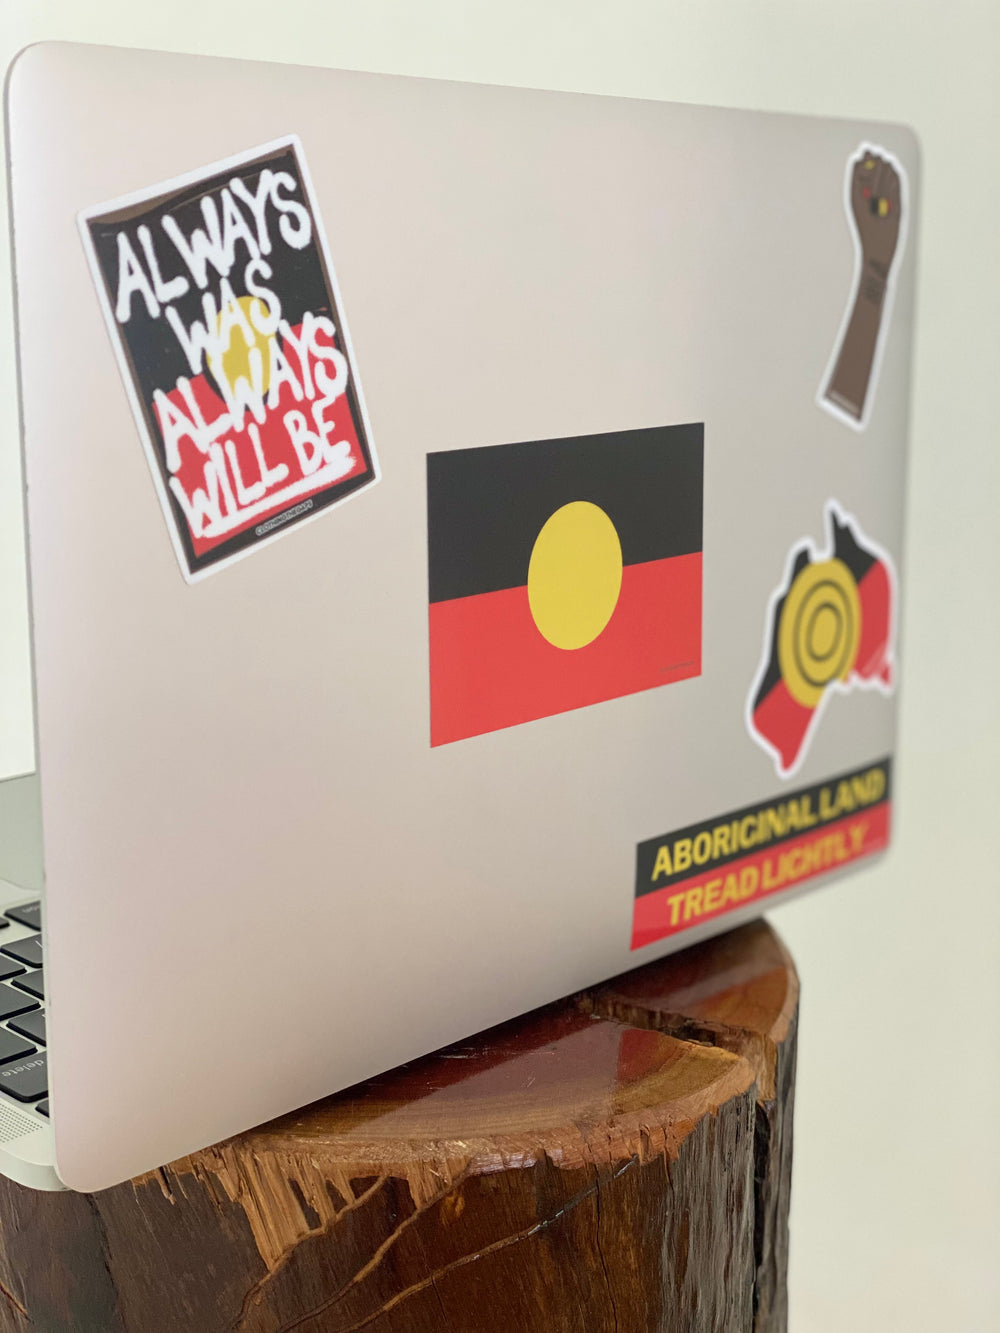 Clothing The Gaps. Black, Yellow and red Aboriginal flag sticker on laptop